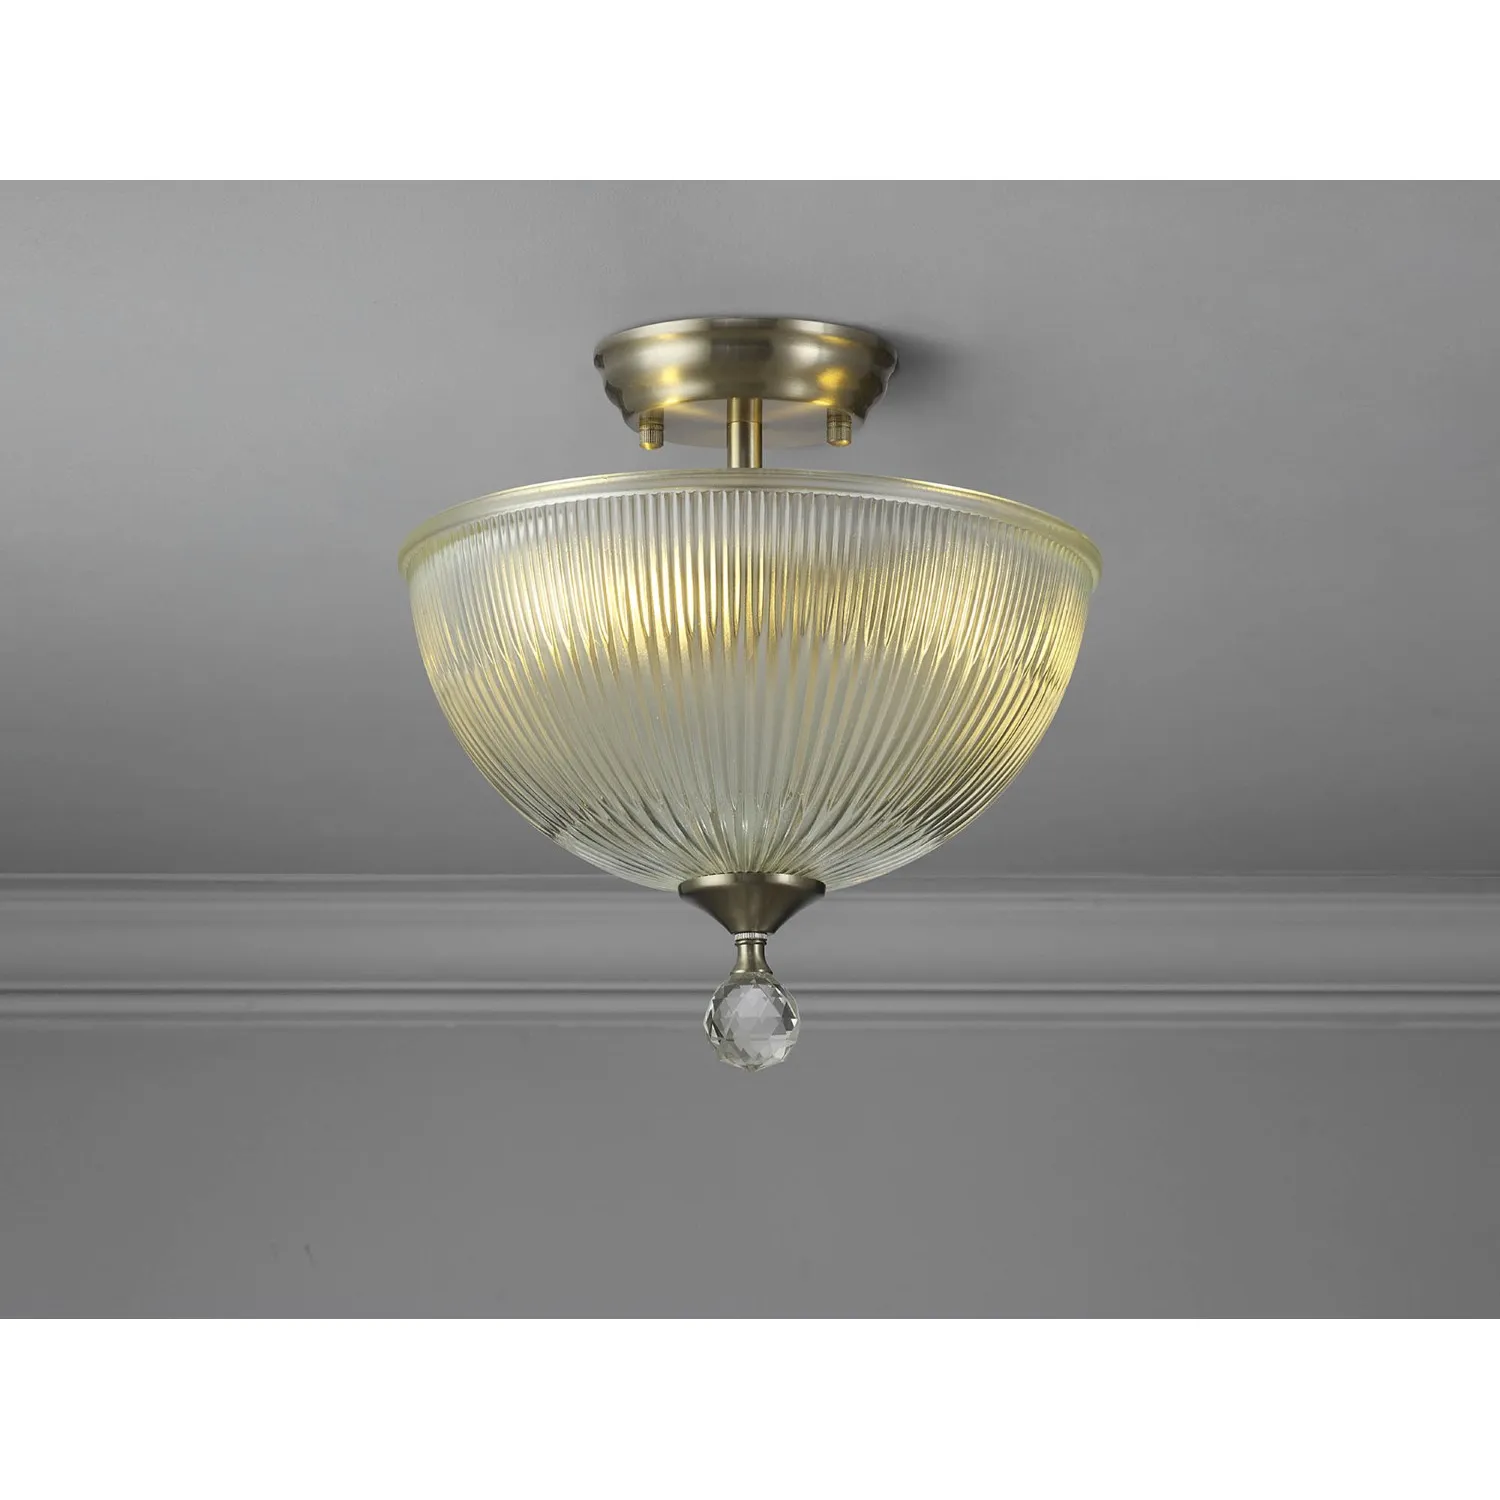 Billericay 2 Light Semi Flush Ceiling E27 With Dome 30cm Glass Shade Satin Nickel Clear